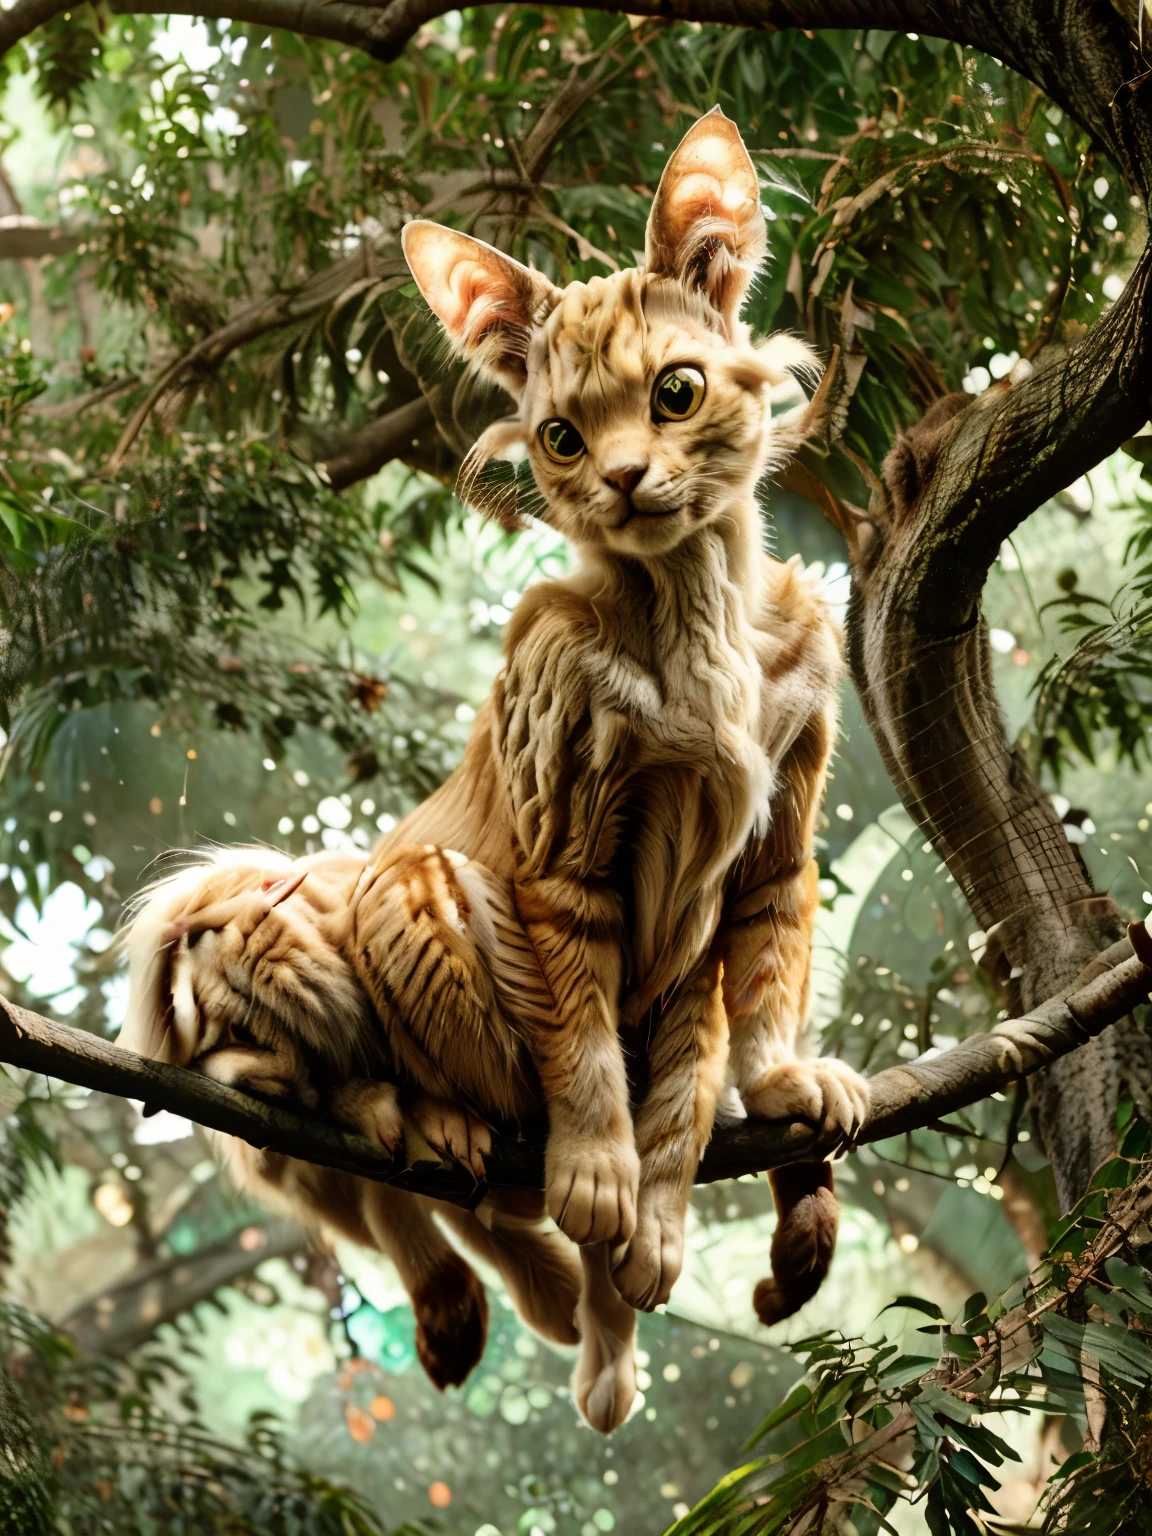 ((a 6 legged cream colored cat with goat eyes laying on a branch in a tree looking down)), cat with long fur and six legs, redwood forest, cat with long cream colored fur and an extra set of legs in the middle, goat eyes, symmetrical, 6 legs, photo realistic, hyper realistic, masterpiece, david weber, treecat, honor harrington